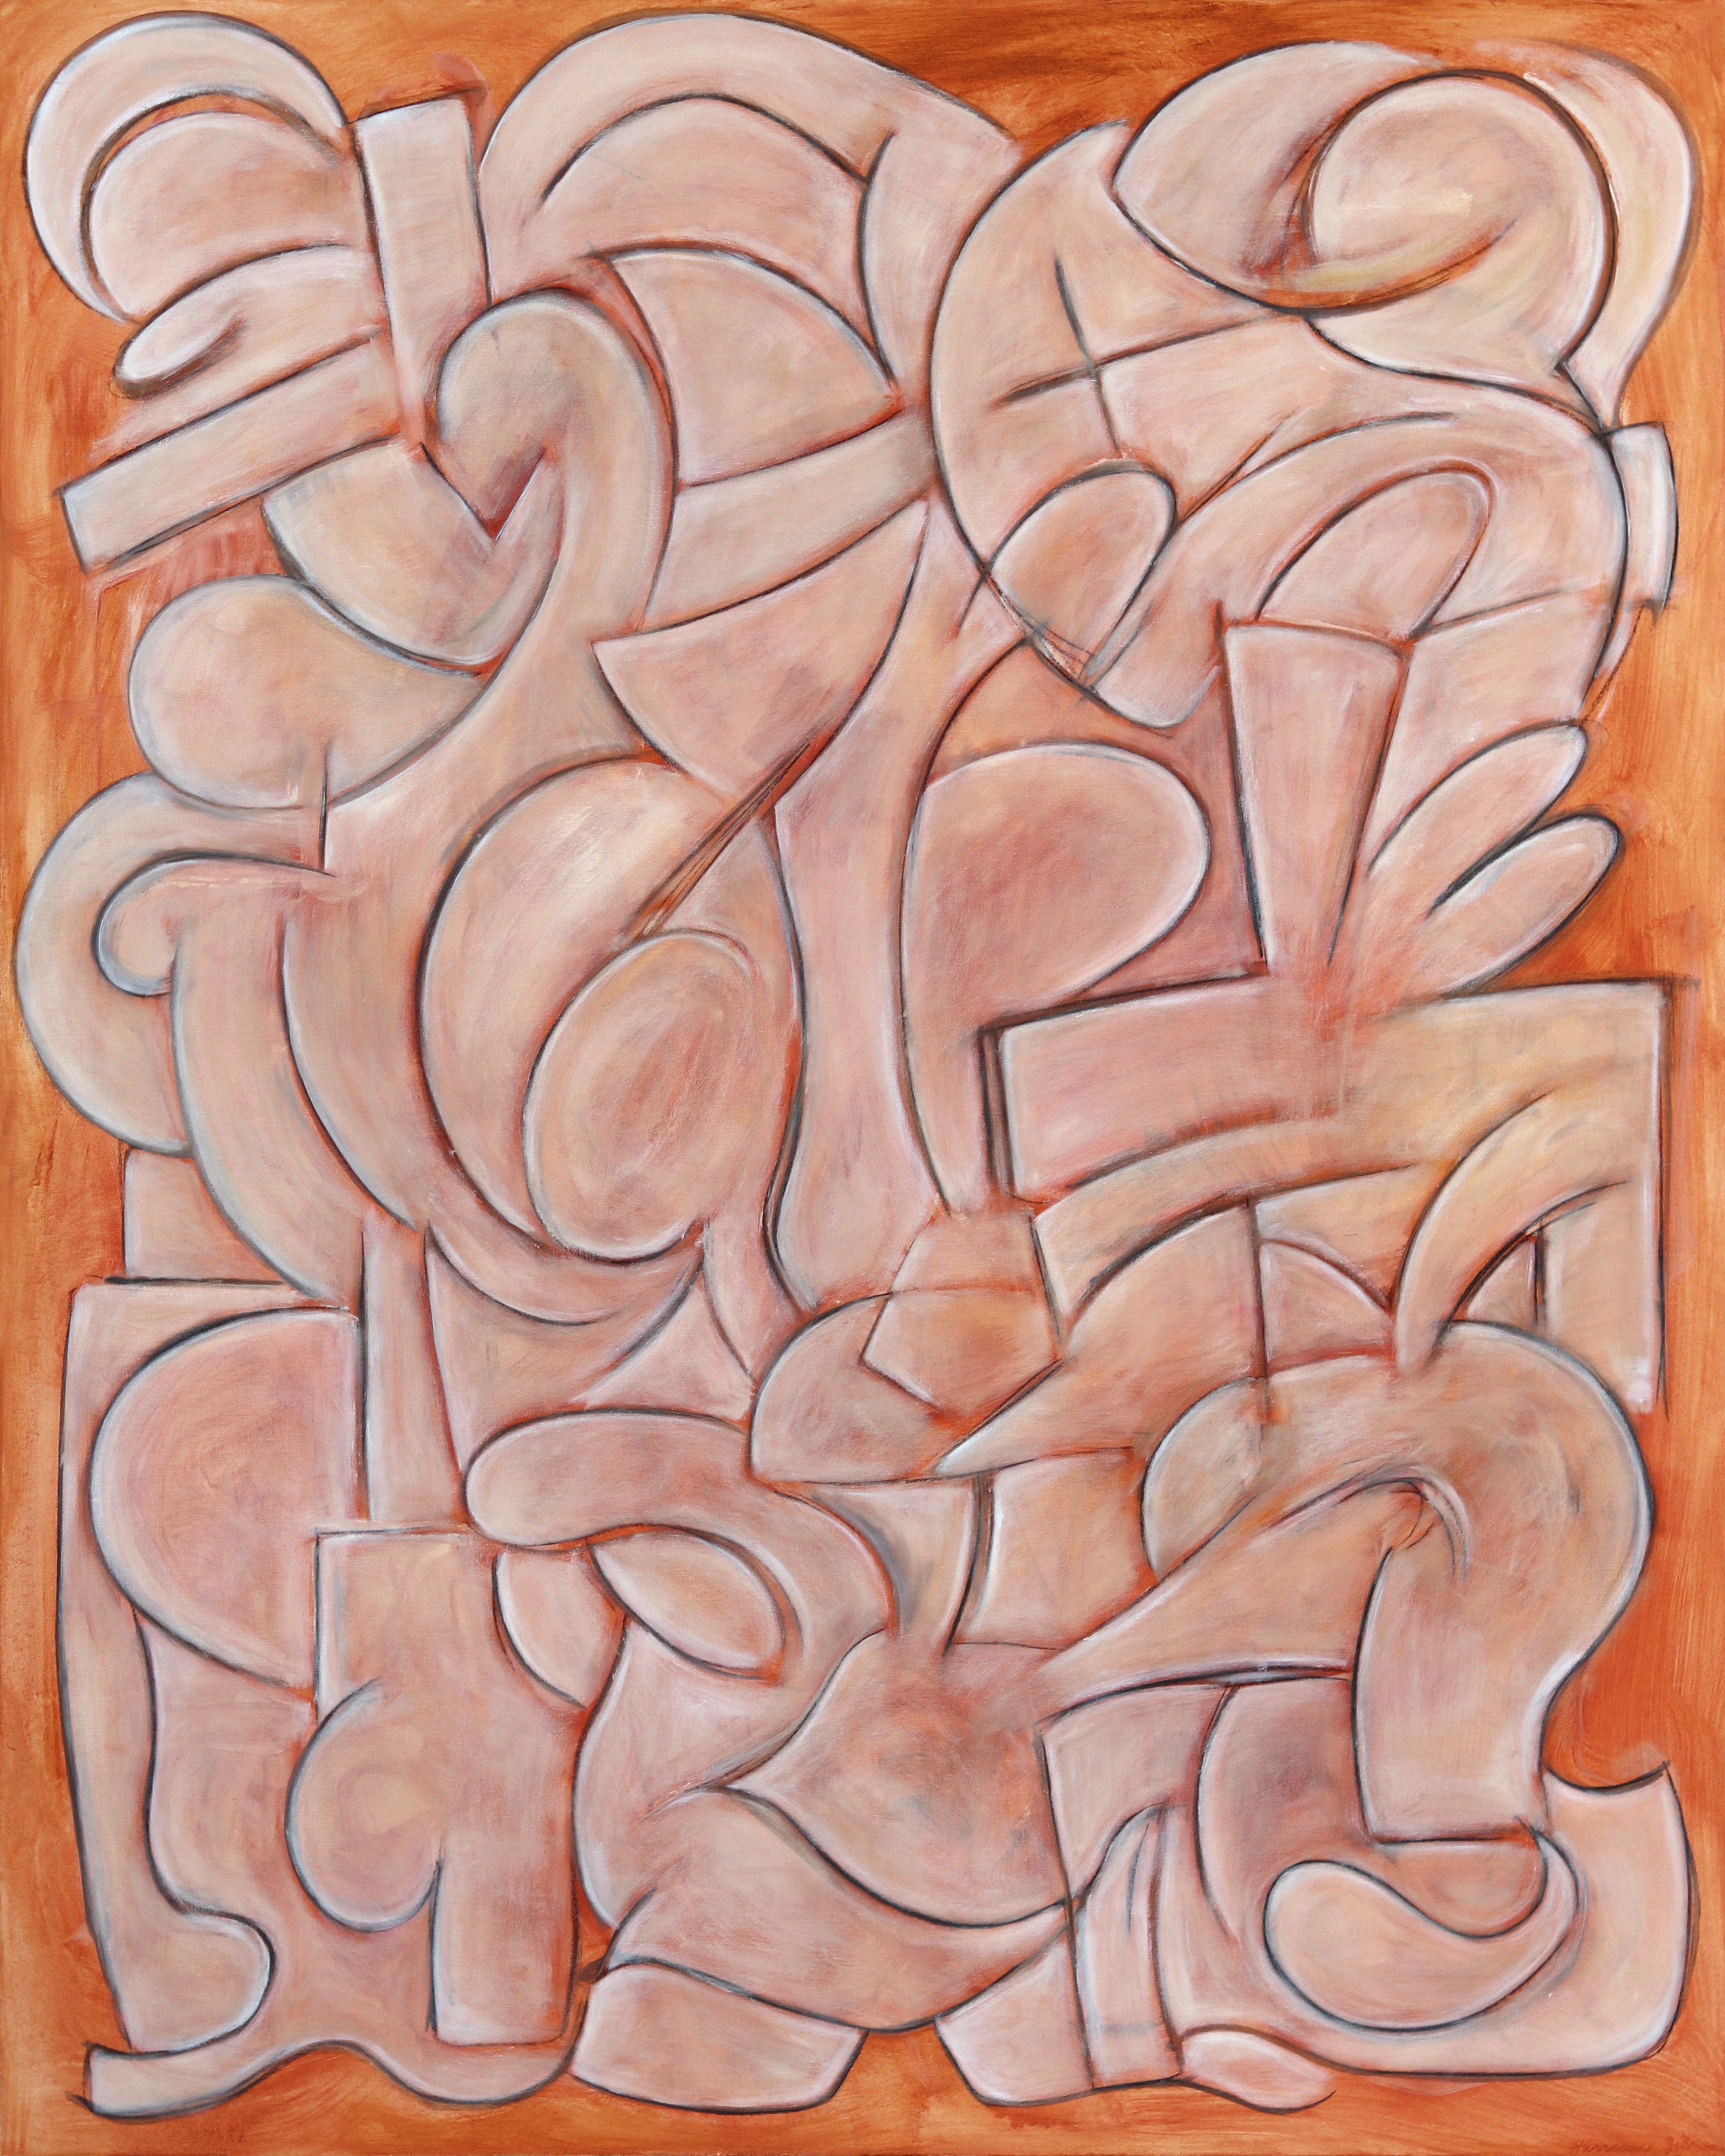 Helter Skelter - Large Contemporary Cubist Terracotta Orange Oil Painting Canvas - Mixed Media Art by Harrison Gilman